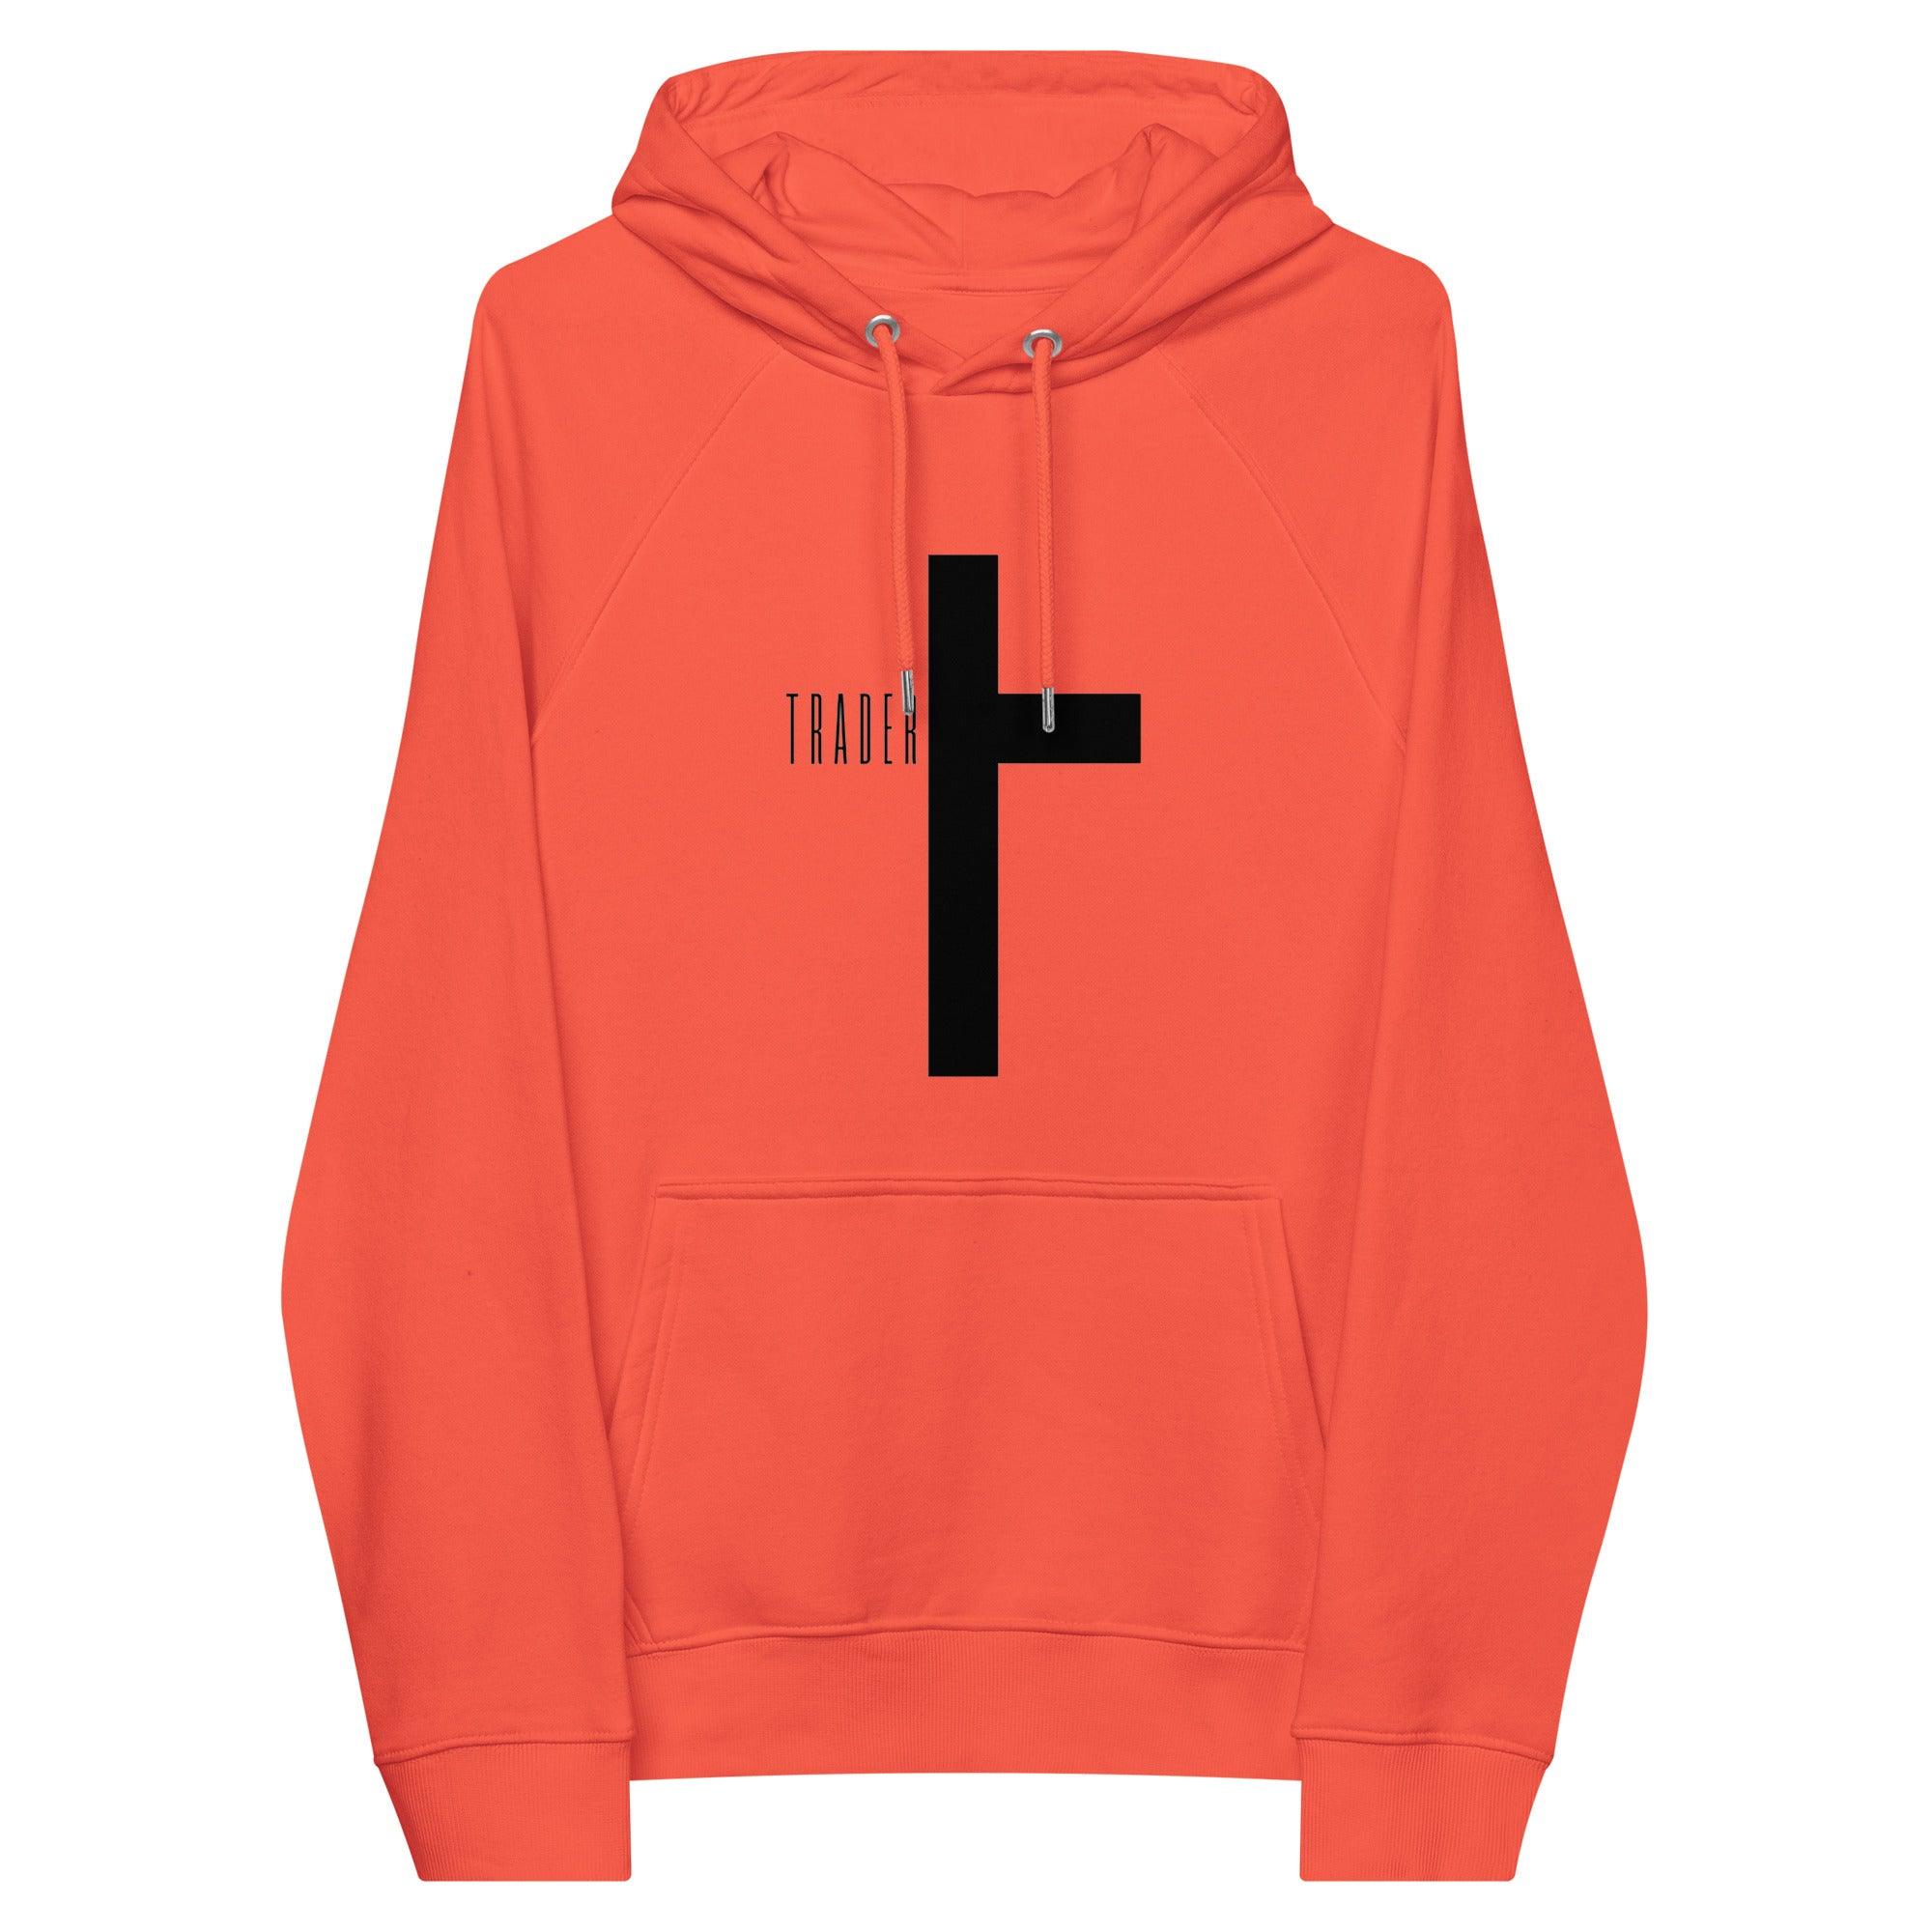 Trader | Investing Pullover Hoodie - InvestmenTees